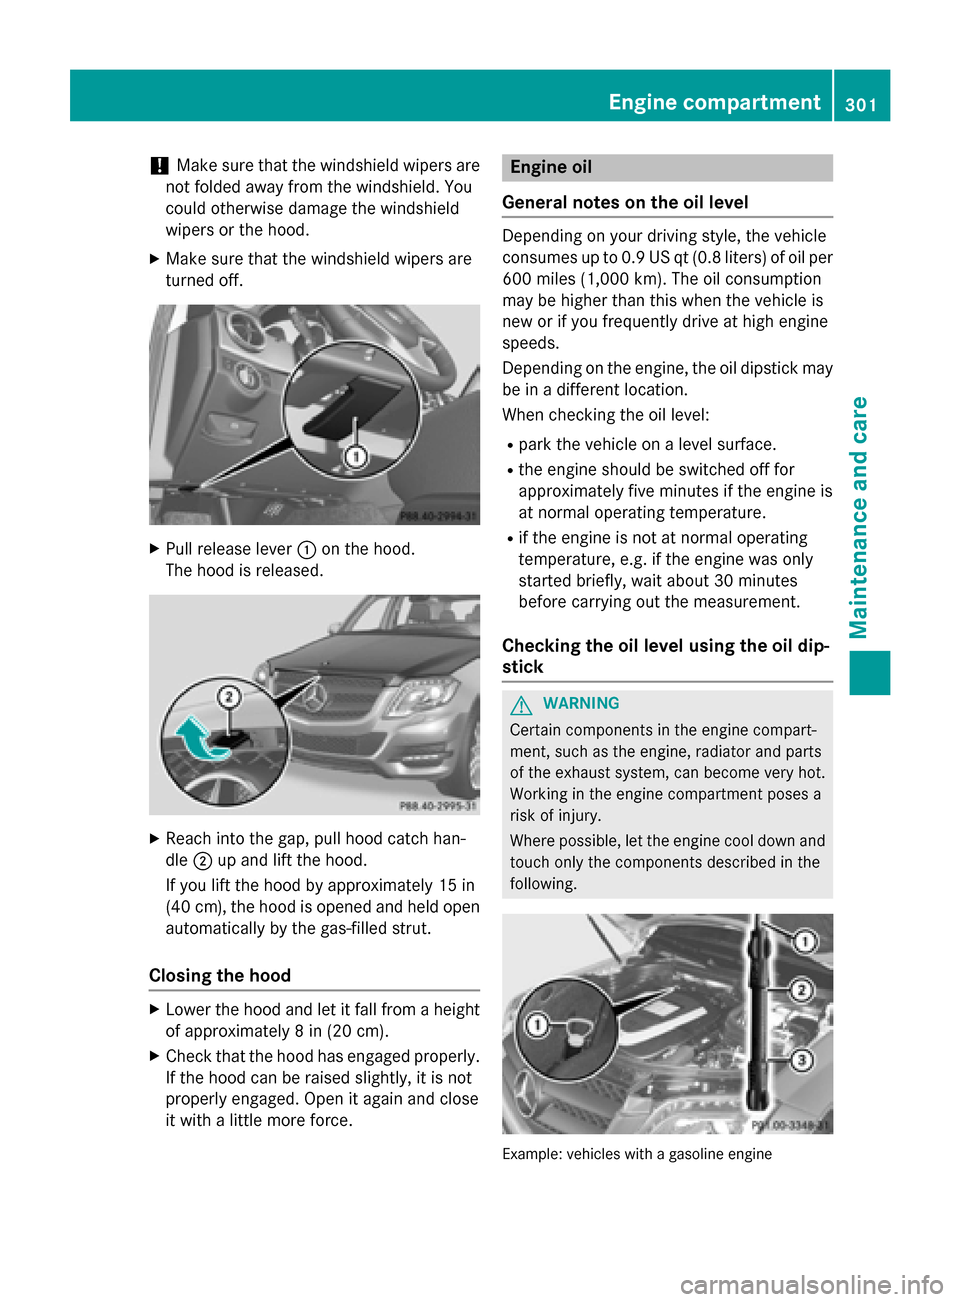 MERCEDES-BENZ GLK-Class 2015 X204 Owners Manual !
Make sure that the windshield wipers are
not folded away from the windshield. You
could otherwise damage the windshield
wipers or the hood.
X Make sure that the windshield wipers are
turned off. X
P